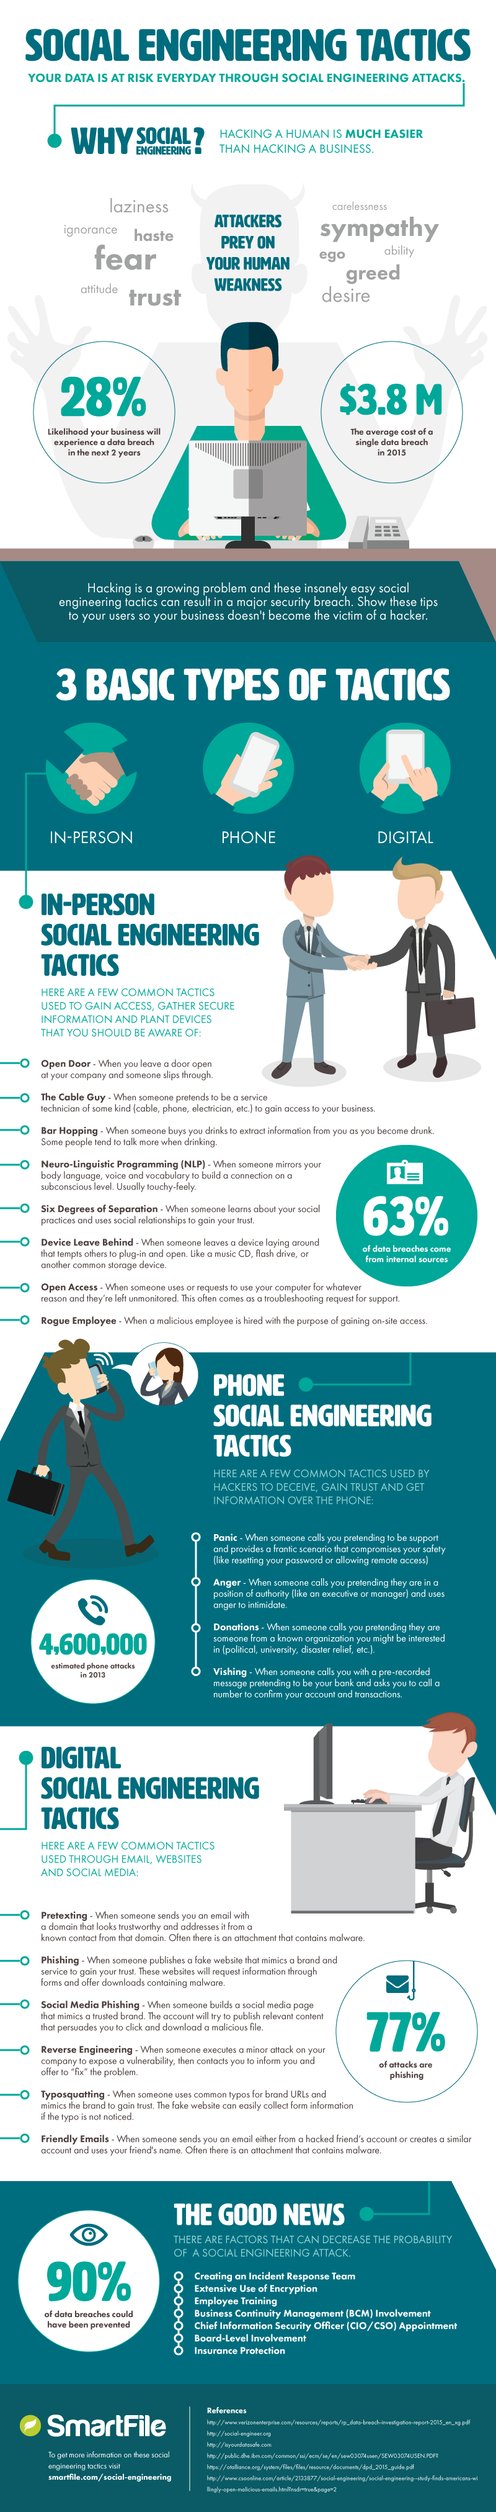 smartfile-social-engineering-infographic.png